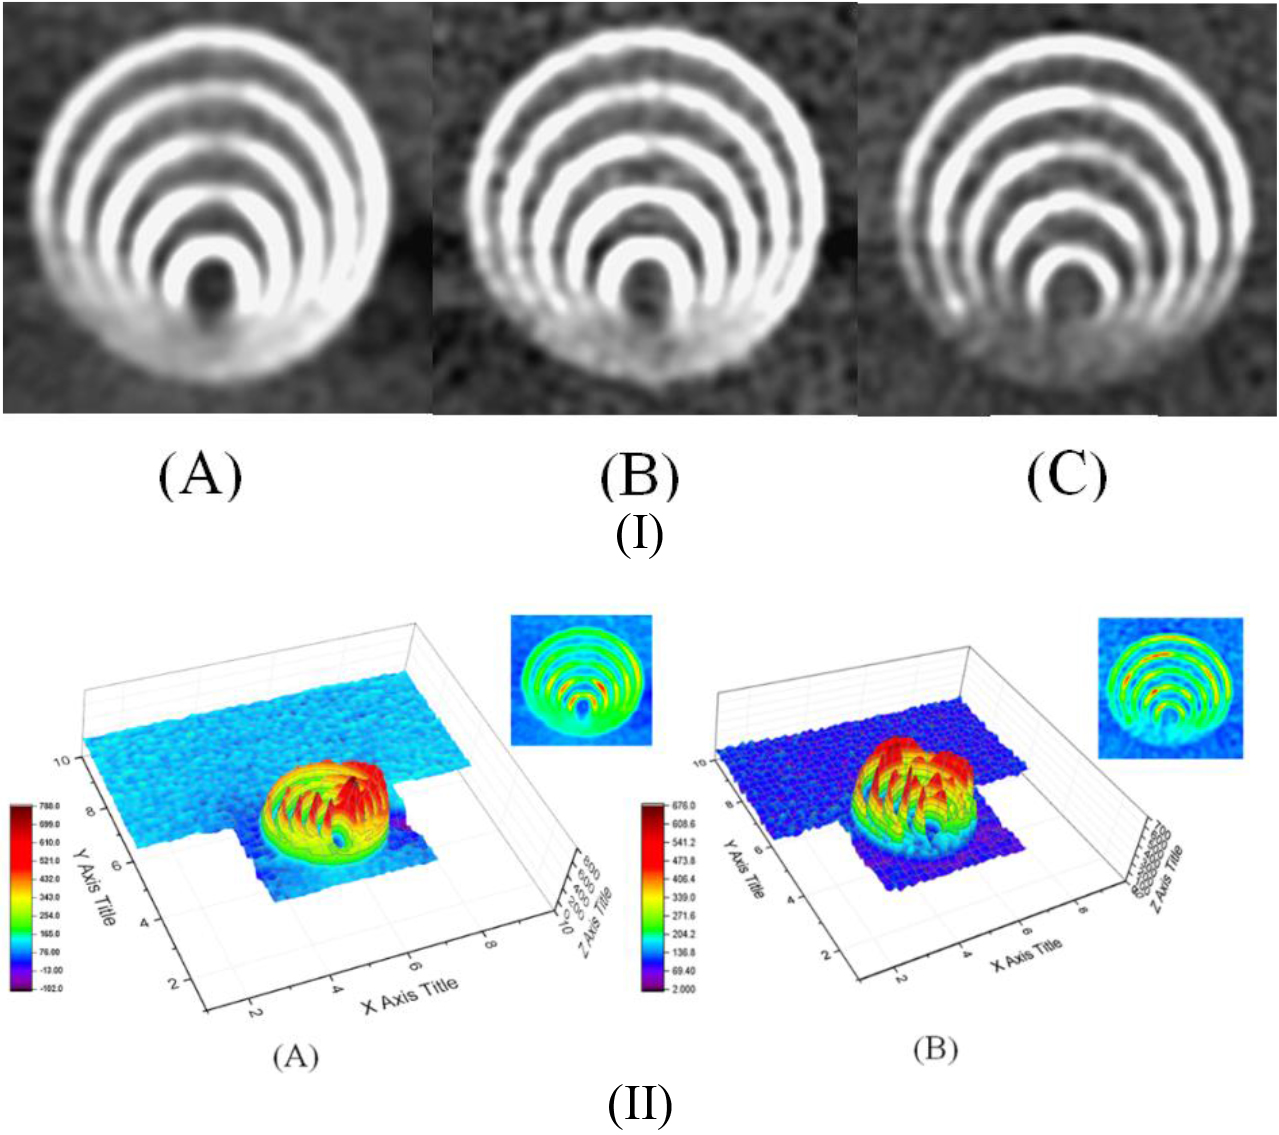 (I) The CTA scan imaging of the five eccentric circles gauge according to (A) conventional preset, (B) the highest S/N (i.e., group 7 among 18 groups) or (C) the optimal preset, (II) 3D plot to emphasize the difference between conventional and optimal CTA setting as (II-A) the conventional preset and (II-B) the optimal preset of CTA factor combination.